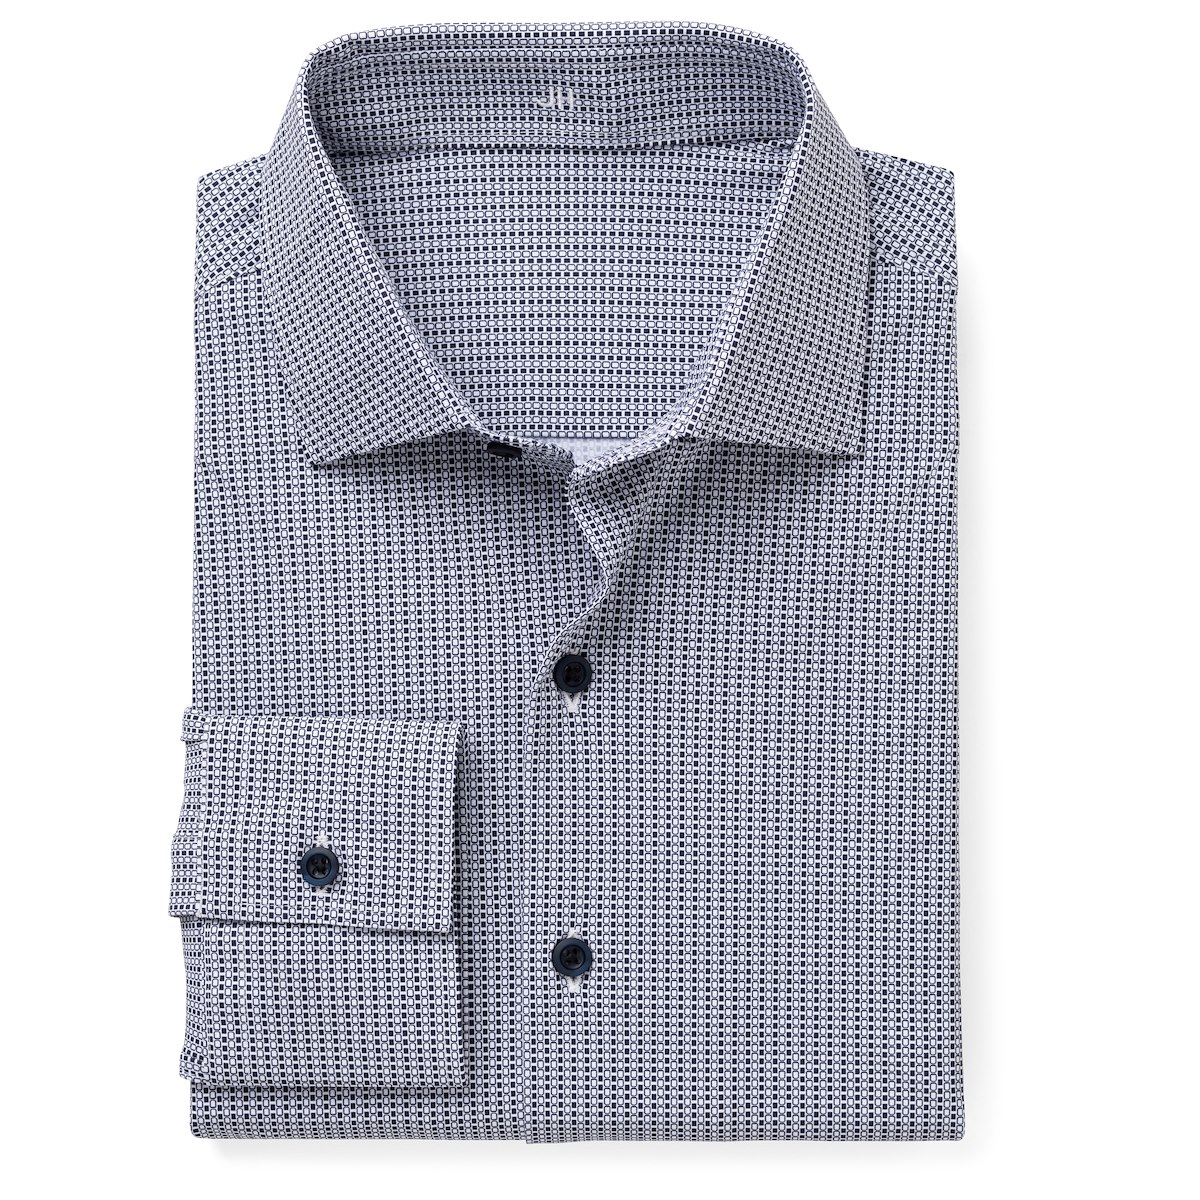 Navy on White Oval and Square Performante Print | J.Hilburn